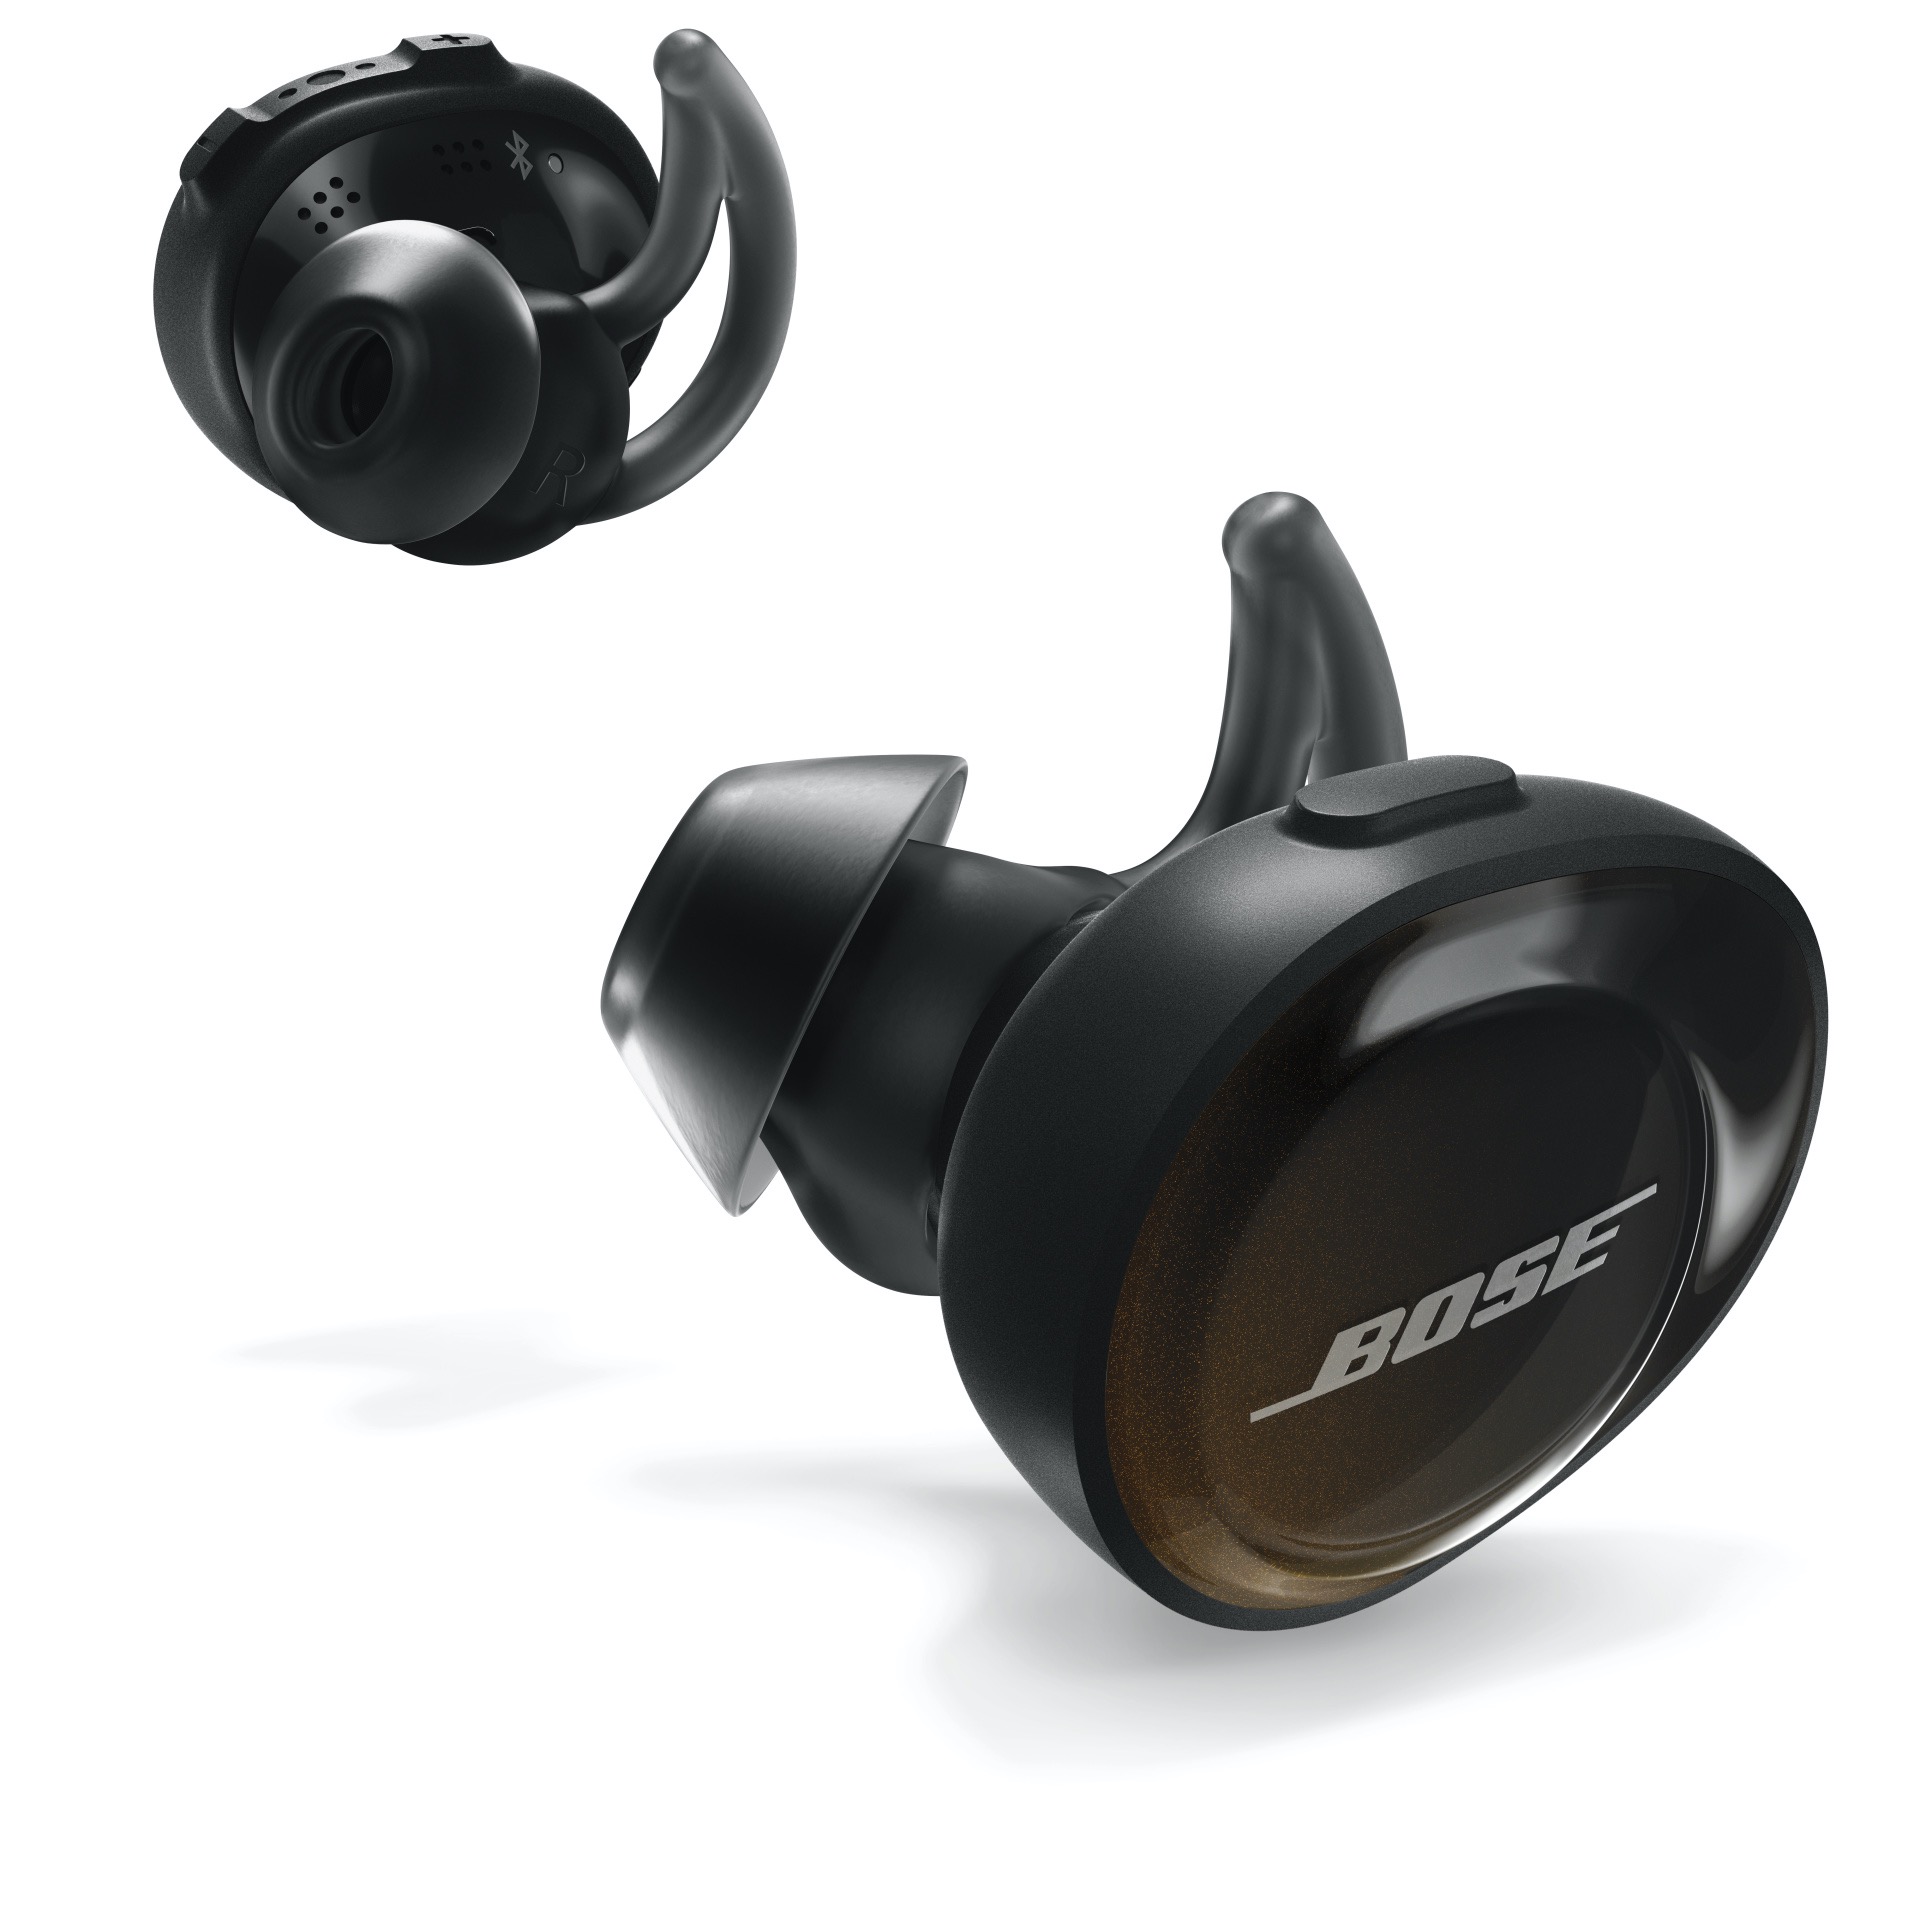 Sony vs Bose headphones which should you choose? What HiFi?